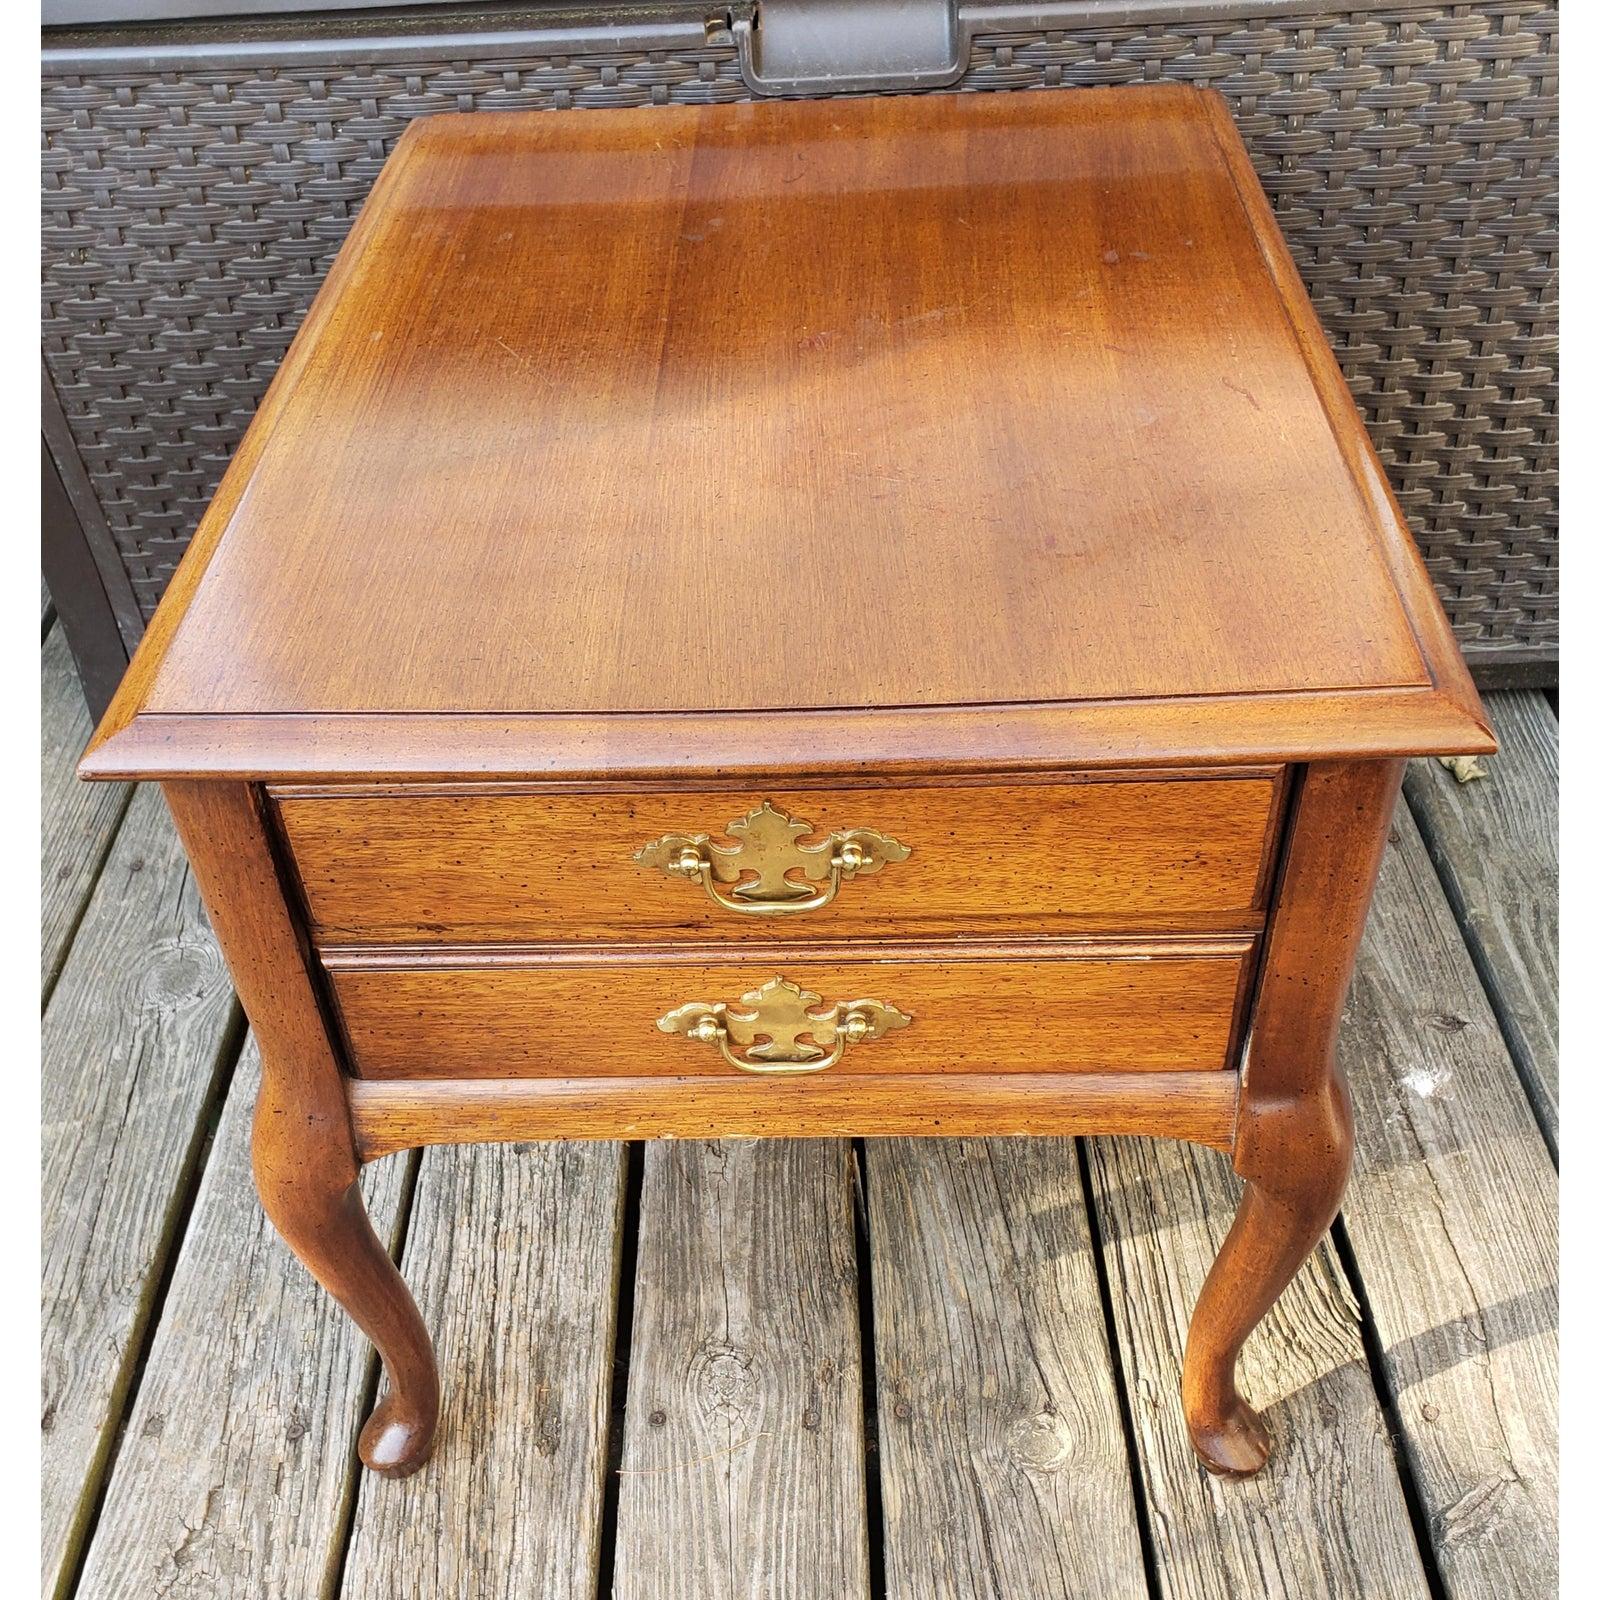 Famous Brandt Furniture made Century Modern side table. 
Table features one large drawer with two handles giving the appearance of a second drawer. Very good condition.
It measures 20W x 26D x20H.